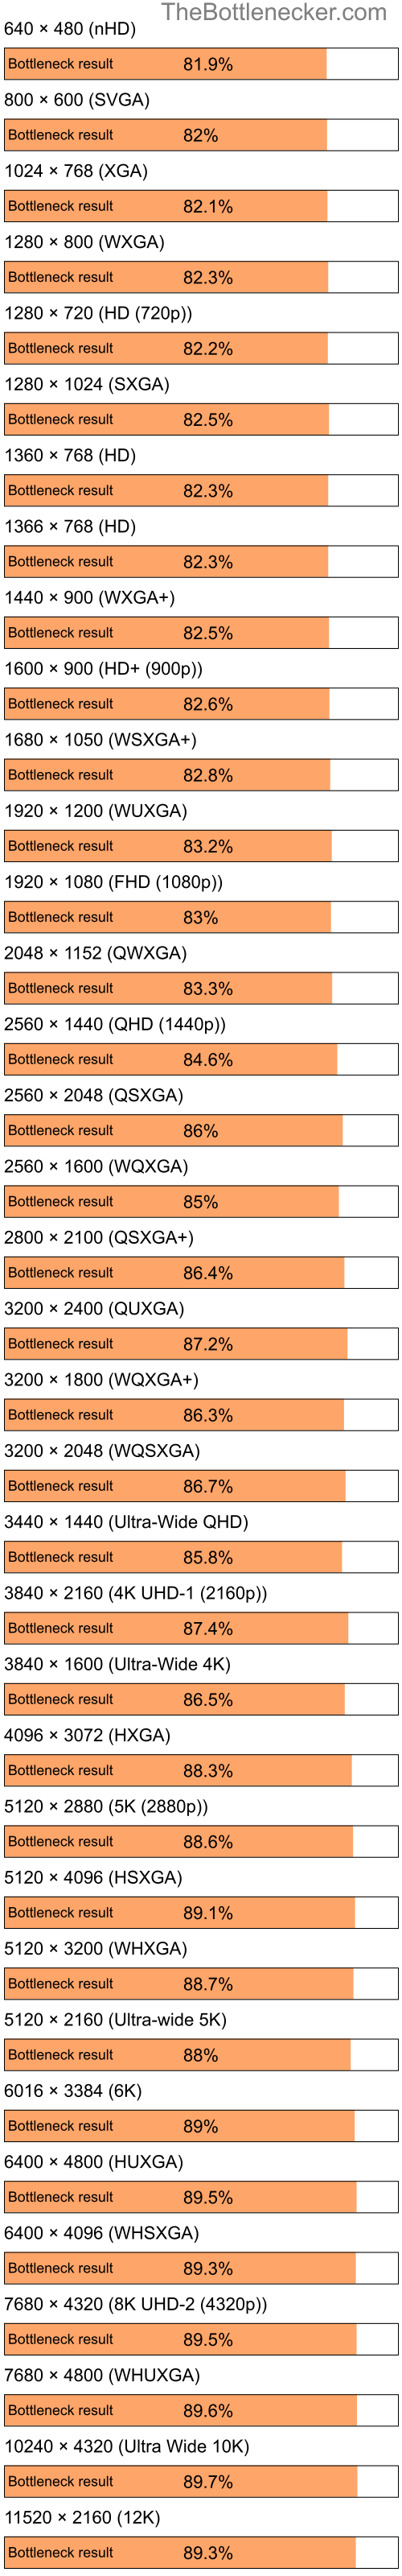 Bottleneck results by resolution for Intel Celeron M 410 and NVIDIA GeForce nForce 630a in Graphic Card Intense Tasks